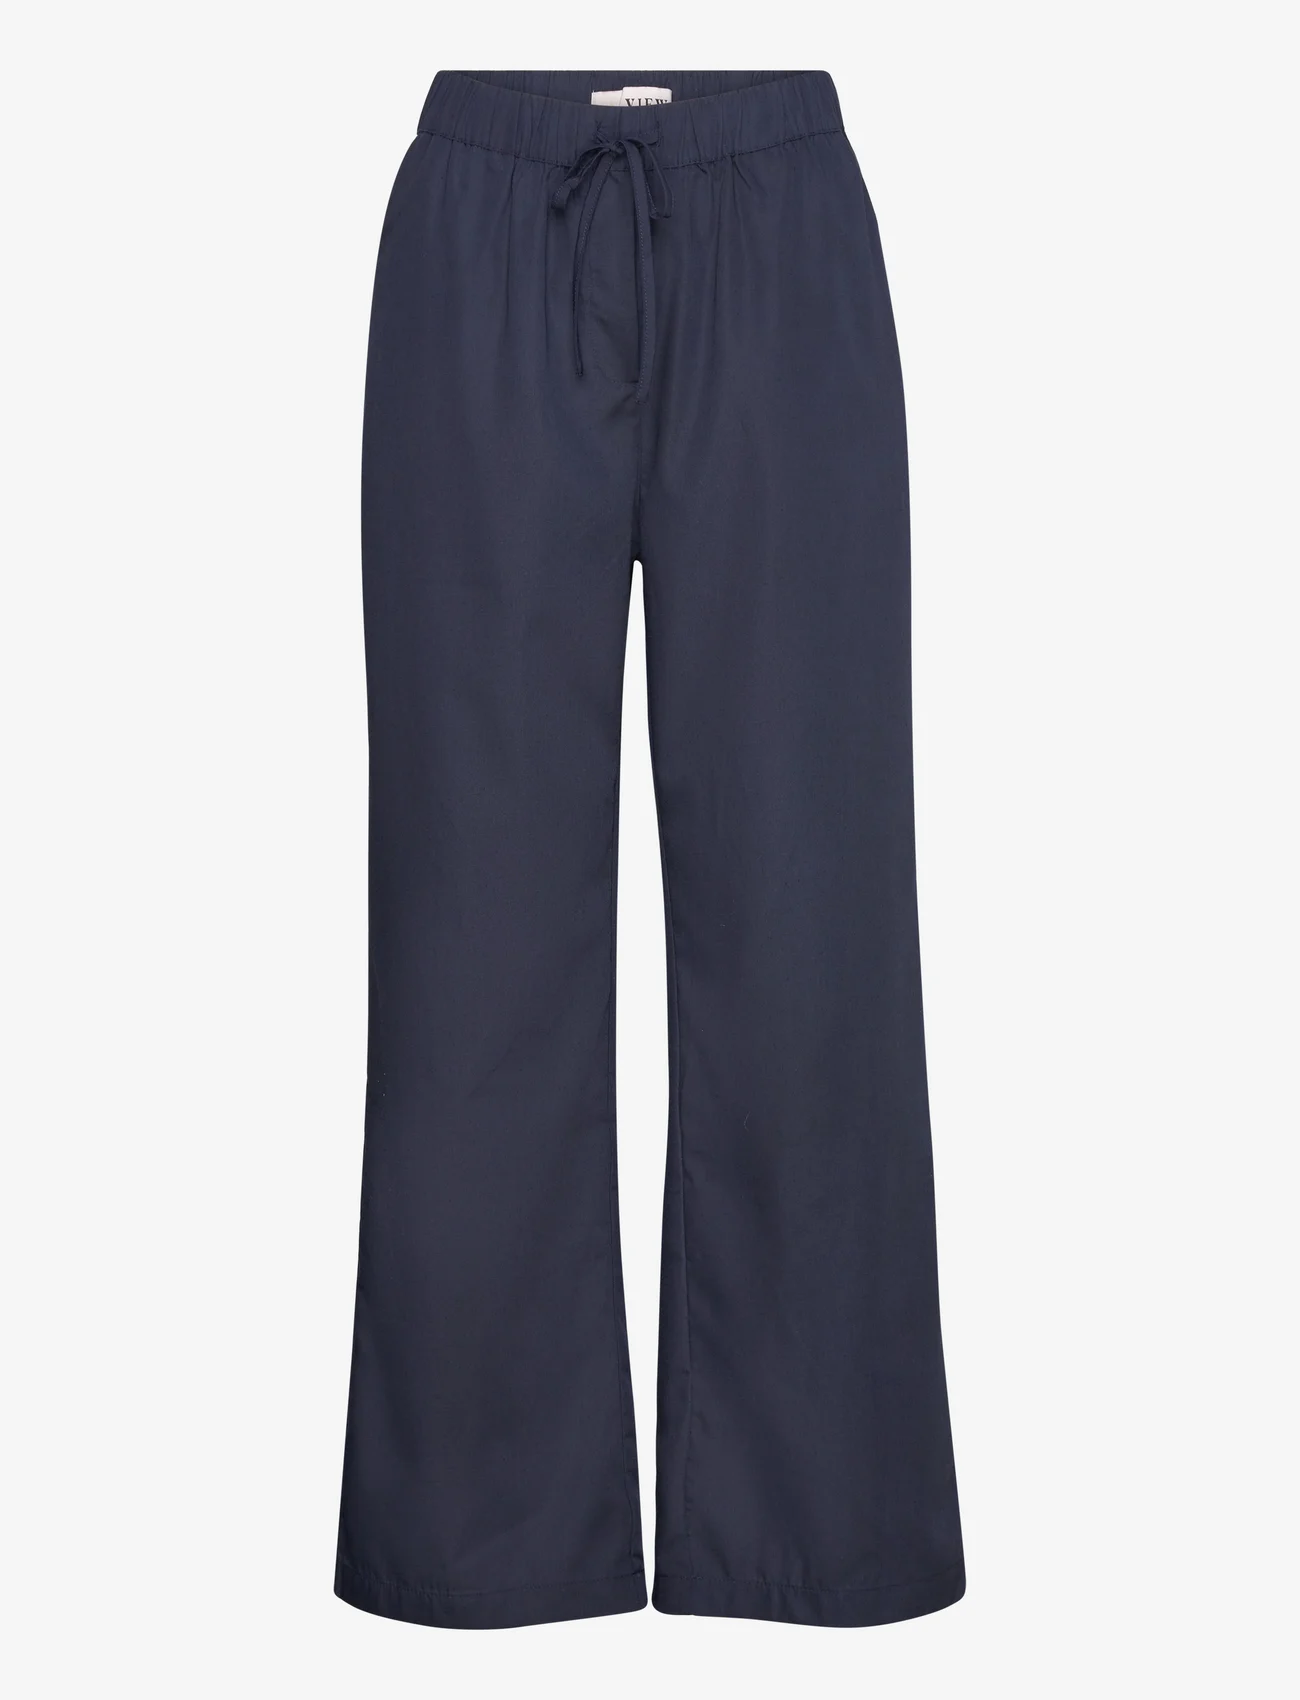 A-View - Brenda solid pants - wide leg trousers - navy - 0